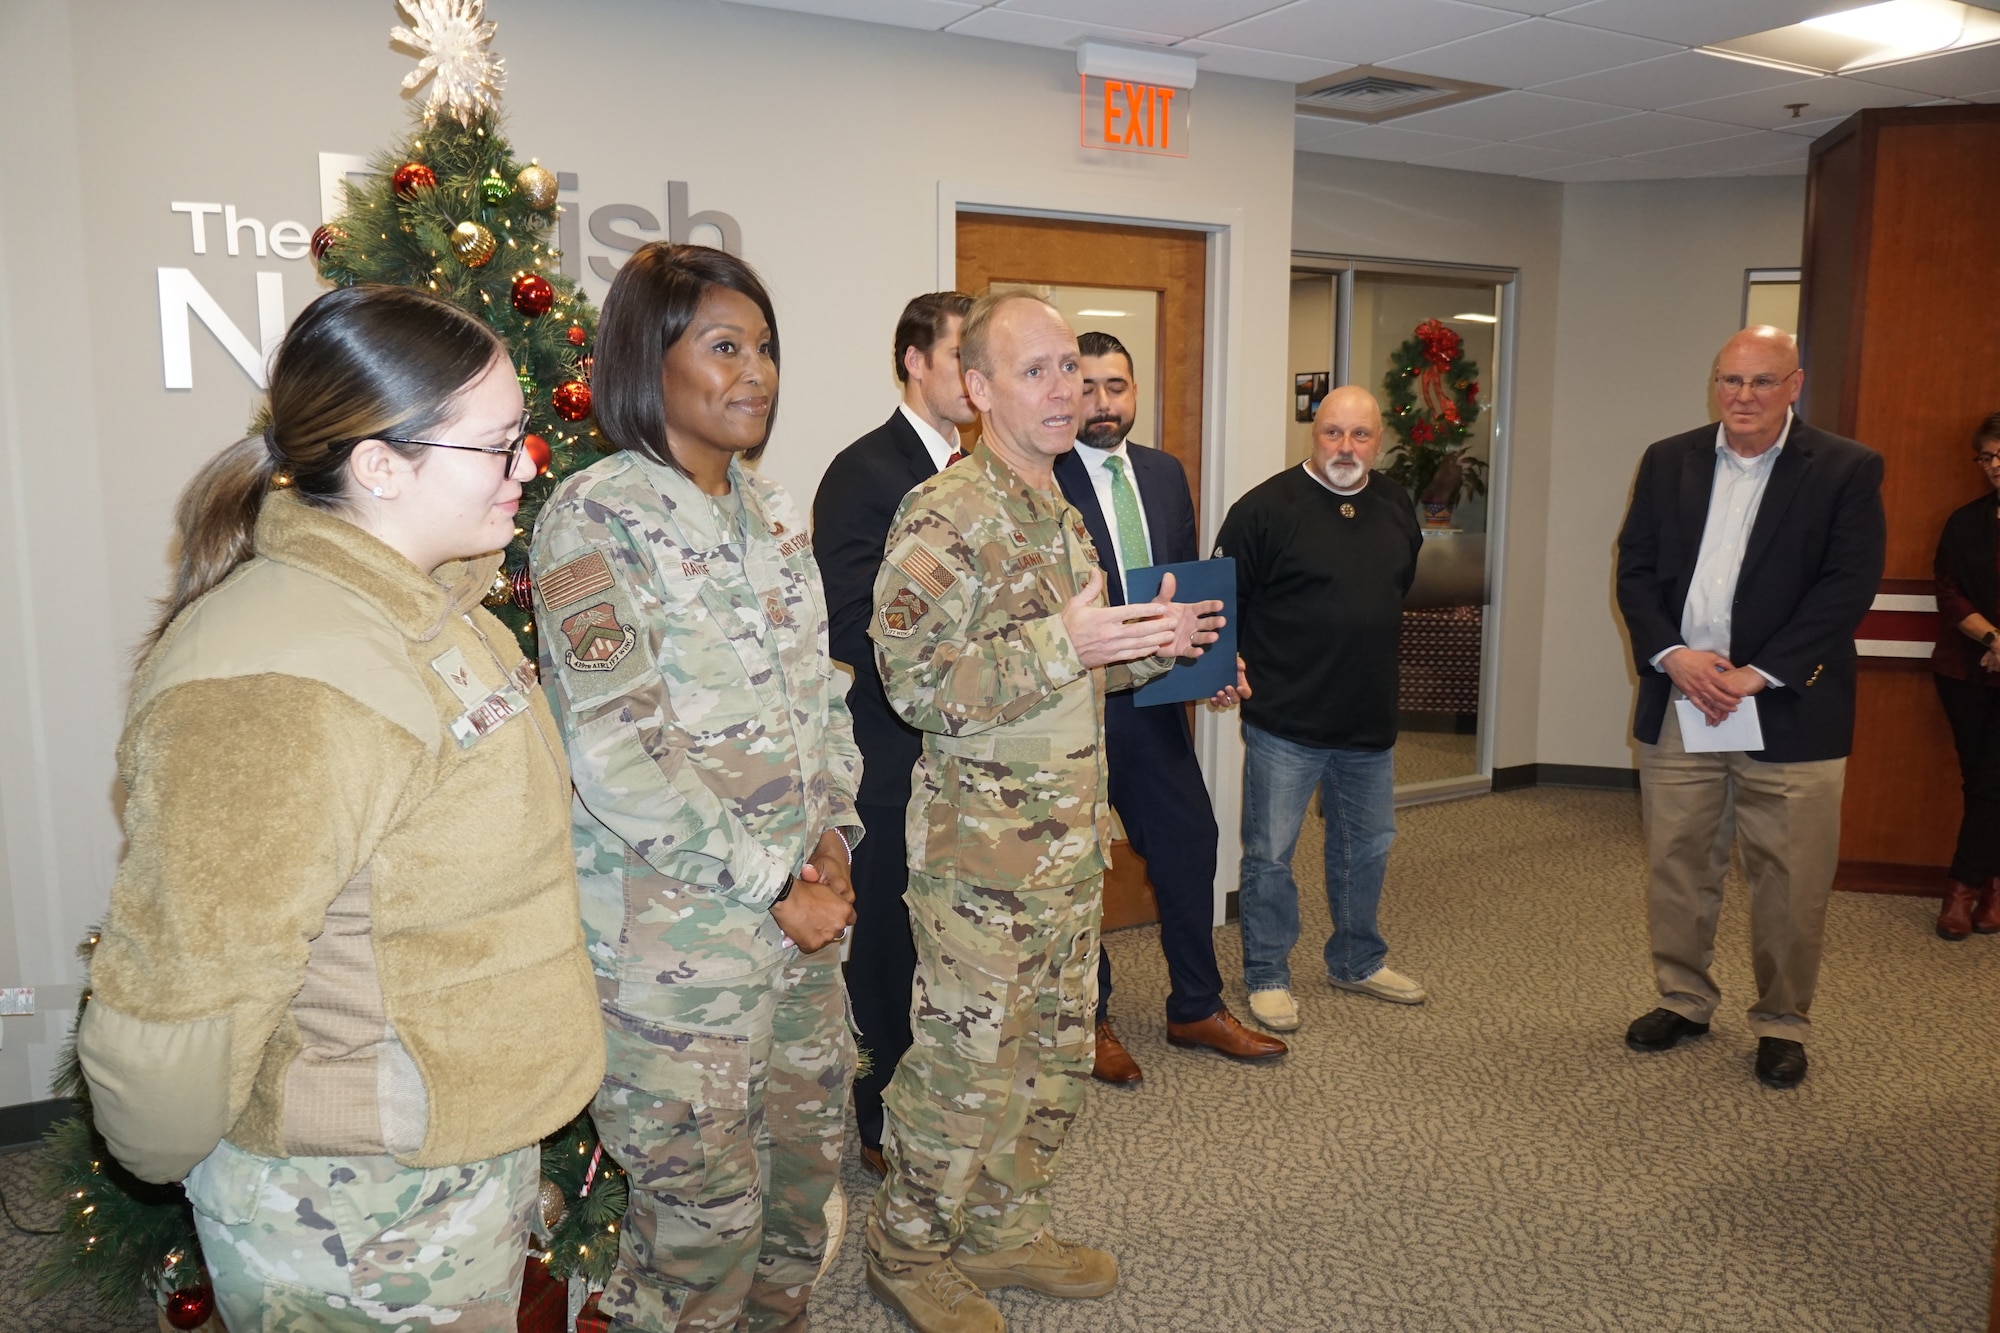 On Dec 21 Colonel Joseph Janik, 439 AW commander and Chief Master Sgt. Rosiline Ratliff, 439 AW command chief attended a recognition event at Polish National Credit Union.